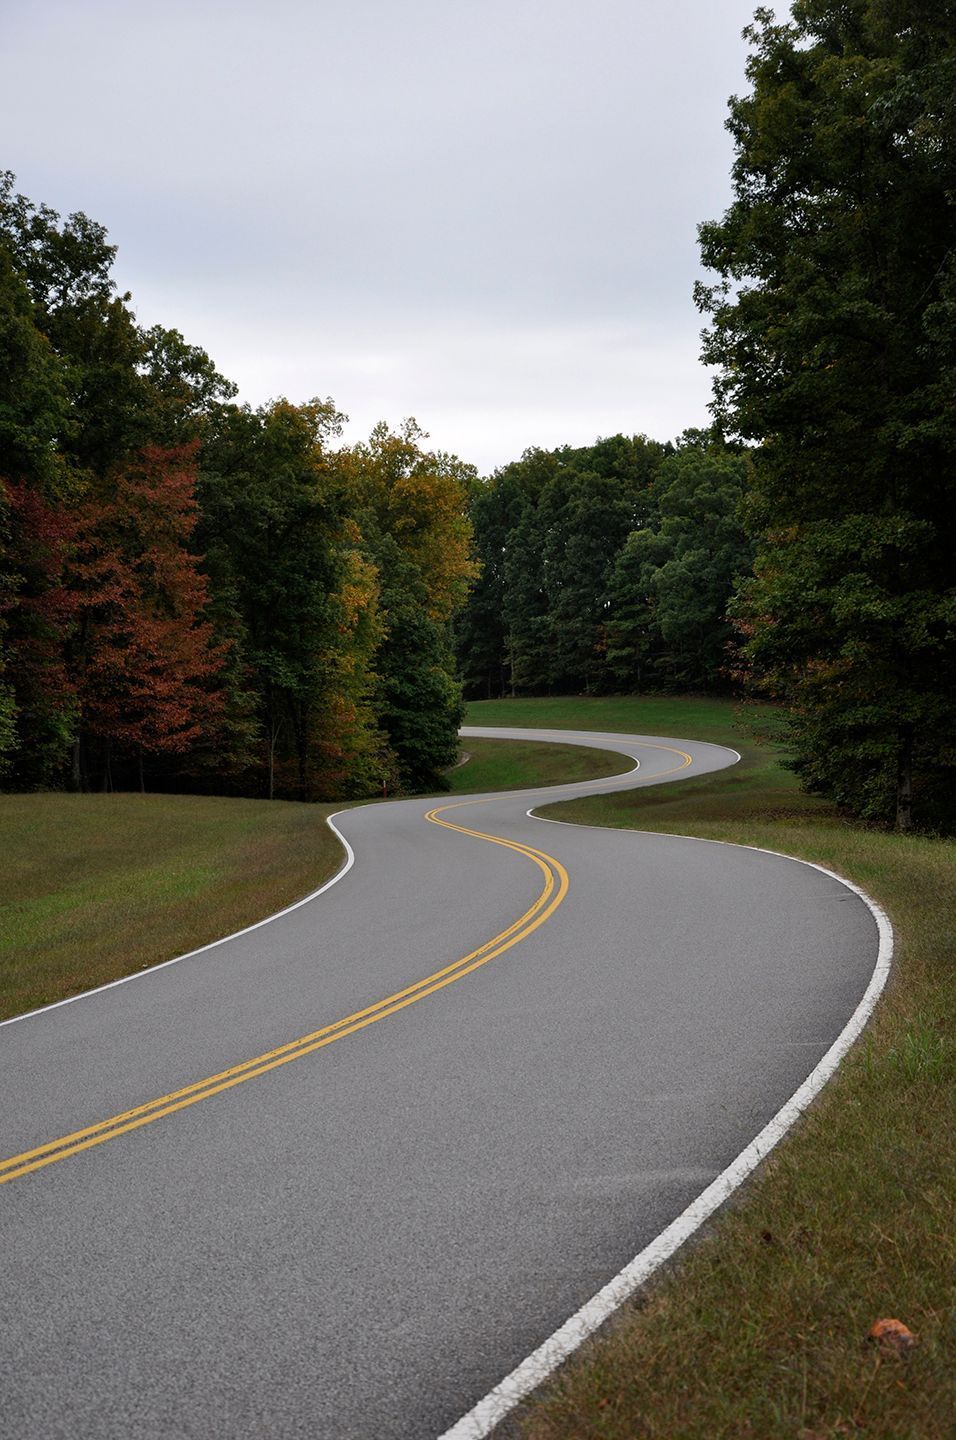 The Natchez Trace Parkway commemorates a historic travel route that helped build the young United States. The Parkway 444 miles, with plenty of stops to allow you to explore some of the history or enjoy the scenery along the way.